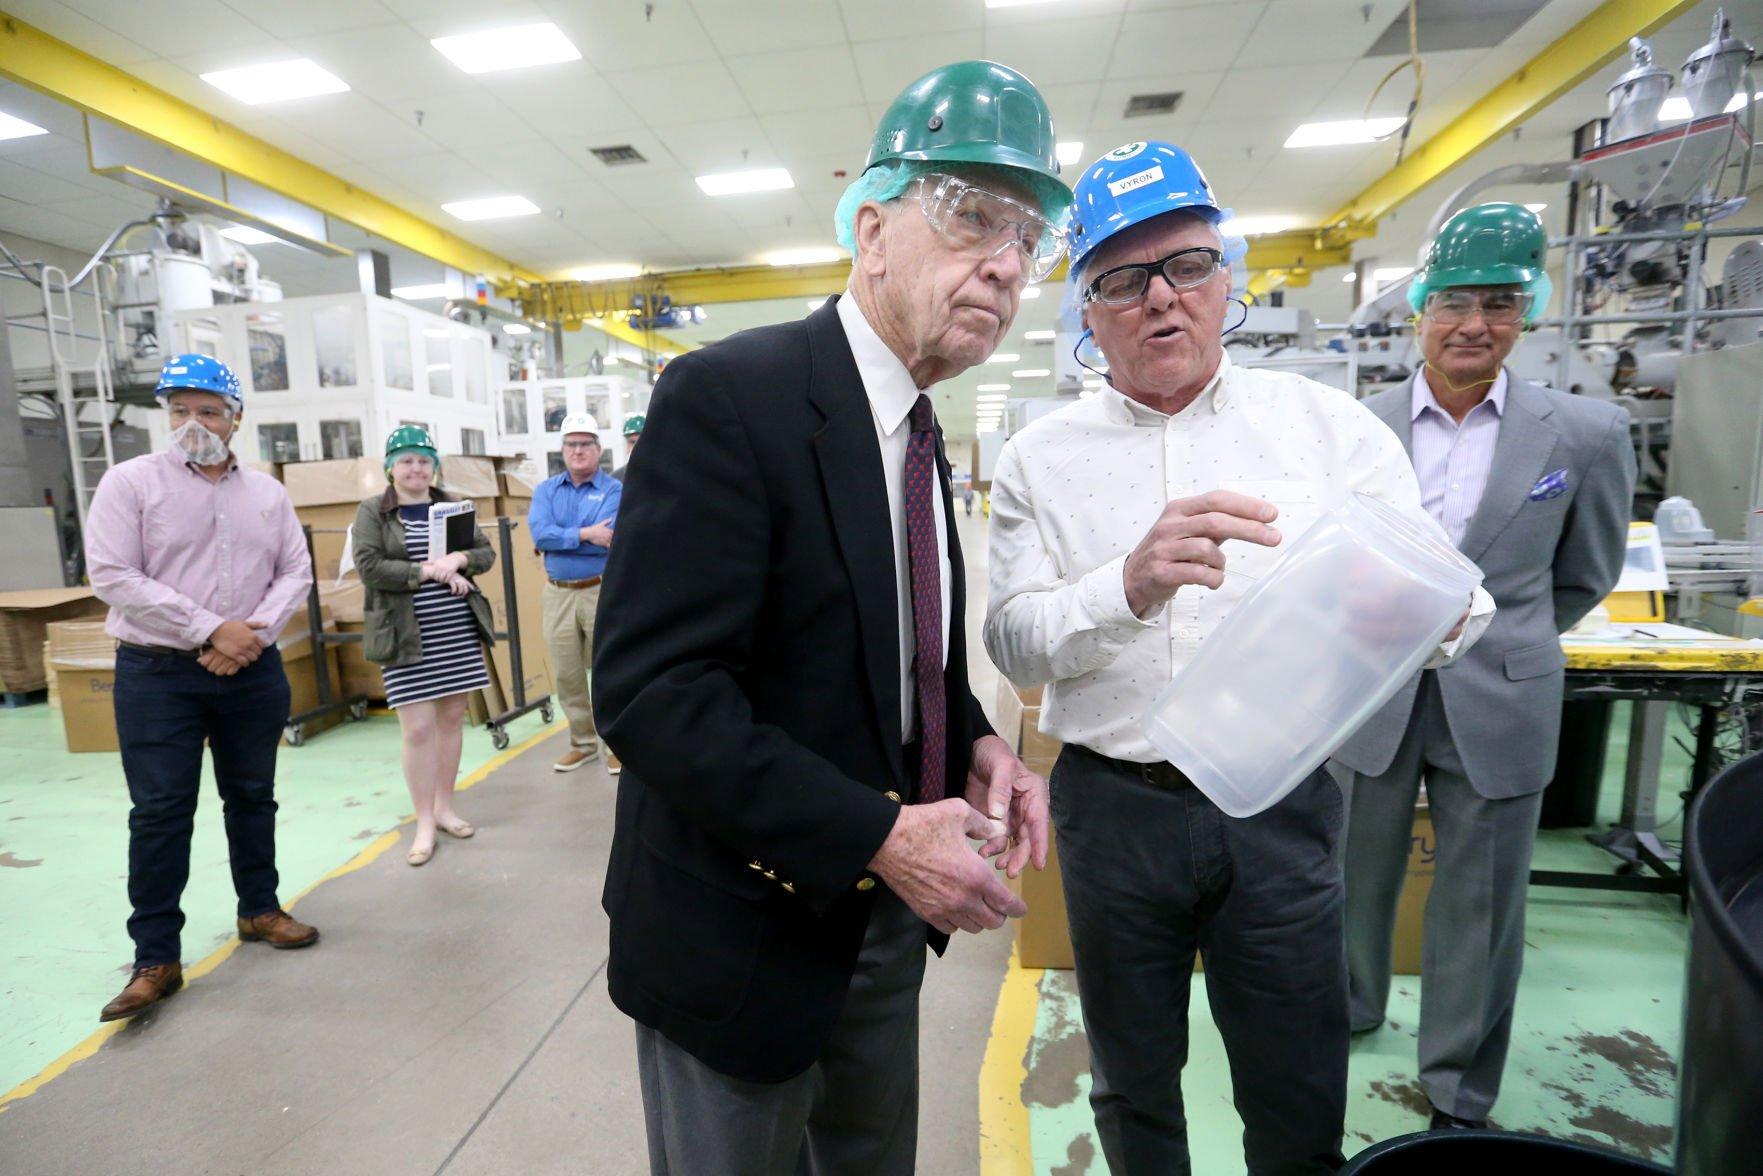 U.S. Sen. Chuck Grassley (left), R-Iowa, speaks with Vyron Nelson, plant manager at Berry Plastics, while Tom Salmon (far right), president and CEO at Berry Plastics, watches during a tour of the company’s facility in Peosta, Iowa, on Tuesday.    PHOTO CREDIT: JESSICA REILLY